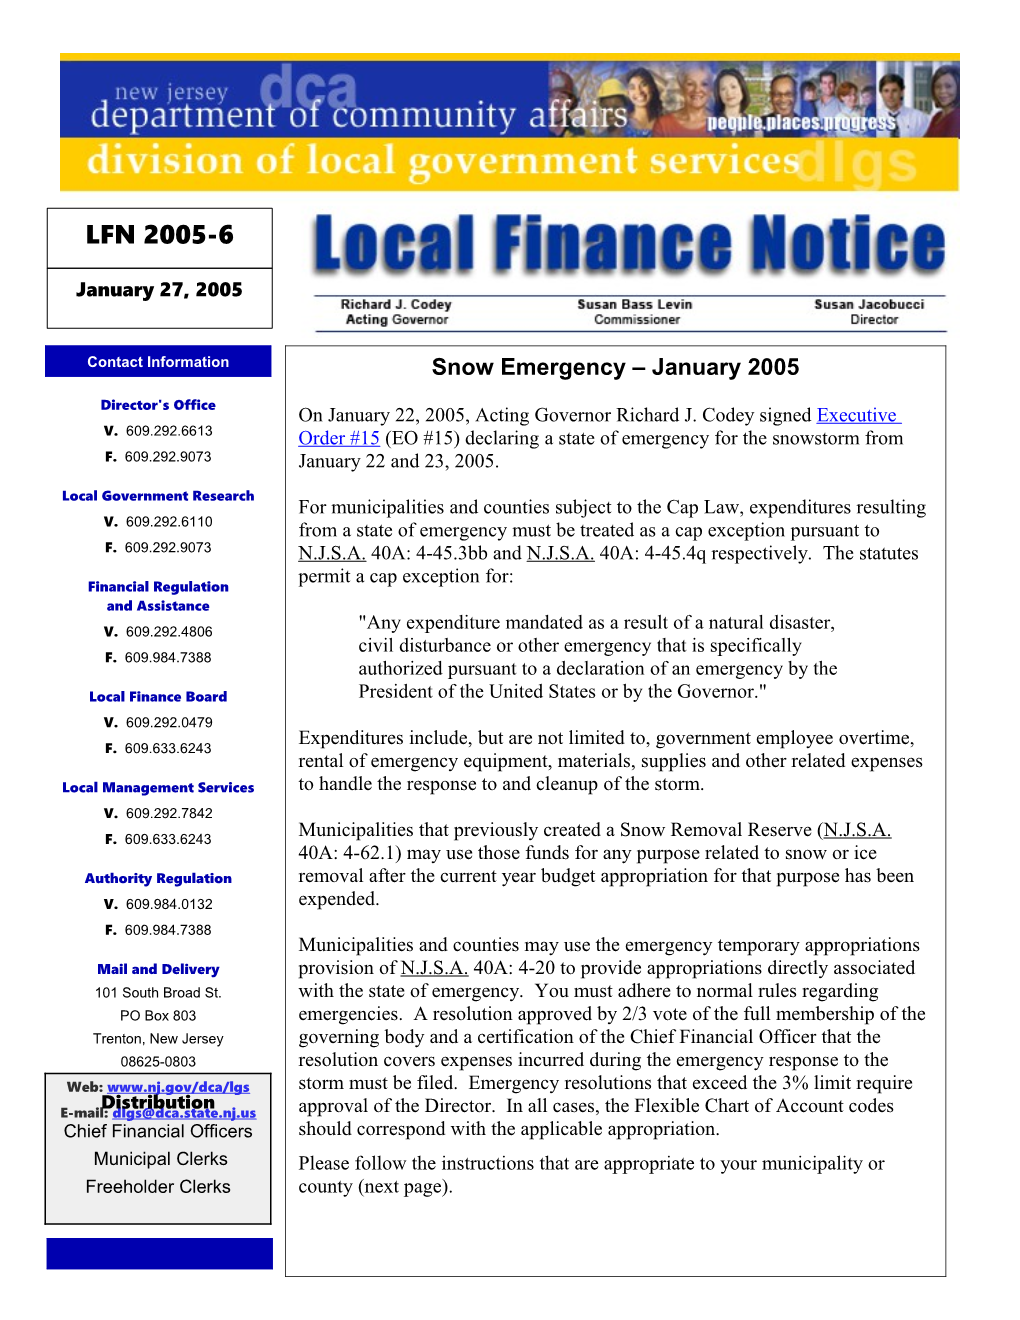 Local Finance Notice 2005-6January 27, 2005Page 1